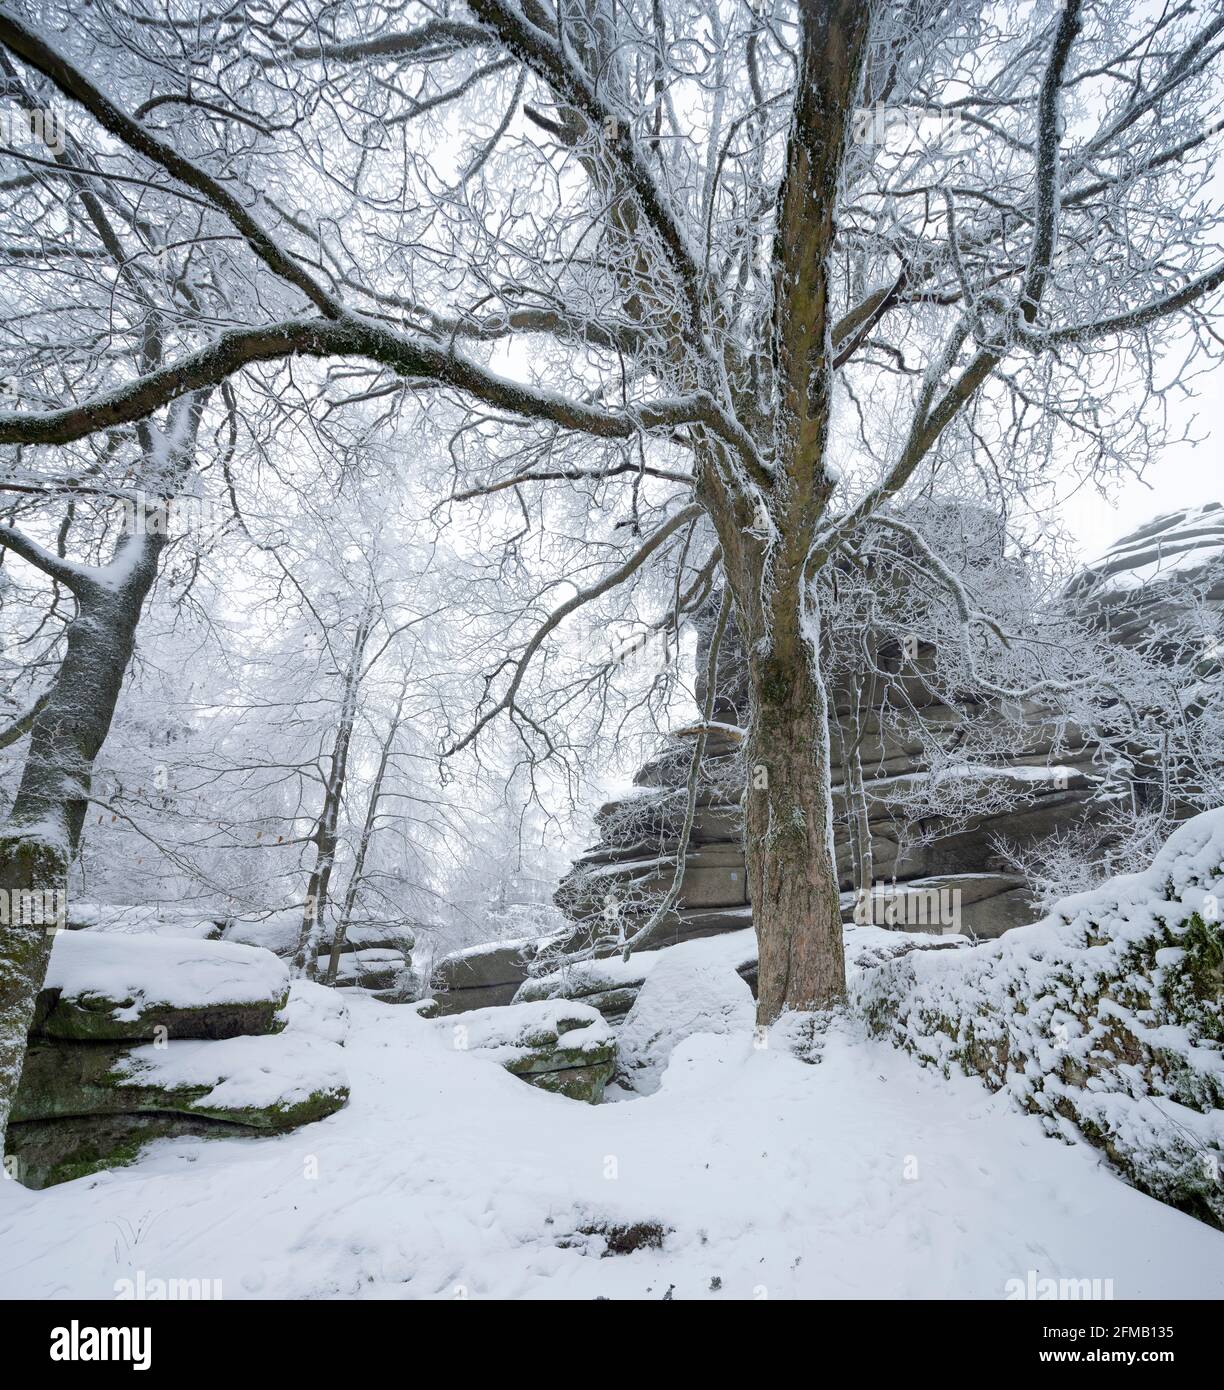 Germany, Bavaria, Franconia, Upper Franconia, Fichtel Mountains, Großer Waldstein, near-natural forest with boulders in winter with snow and hoar frost Stock Photo